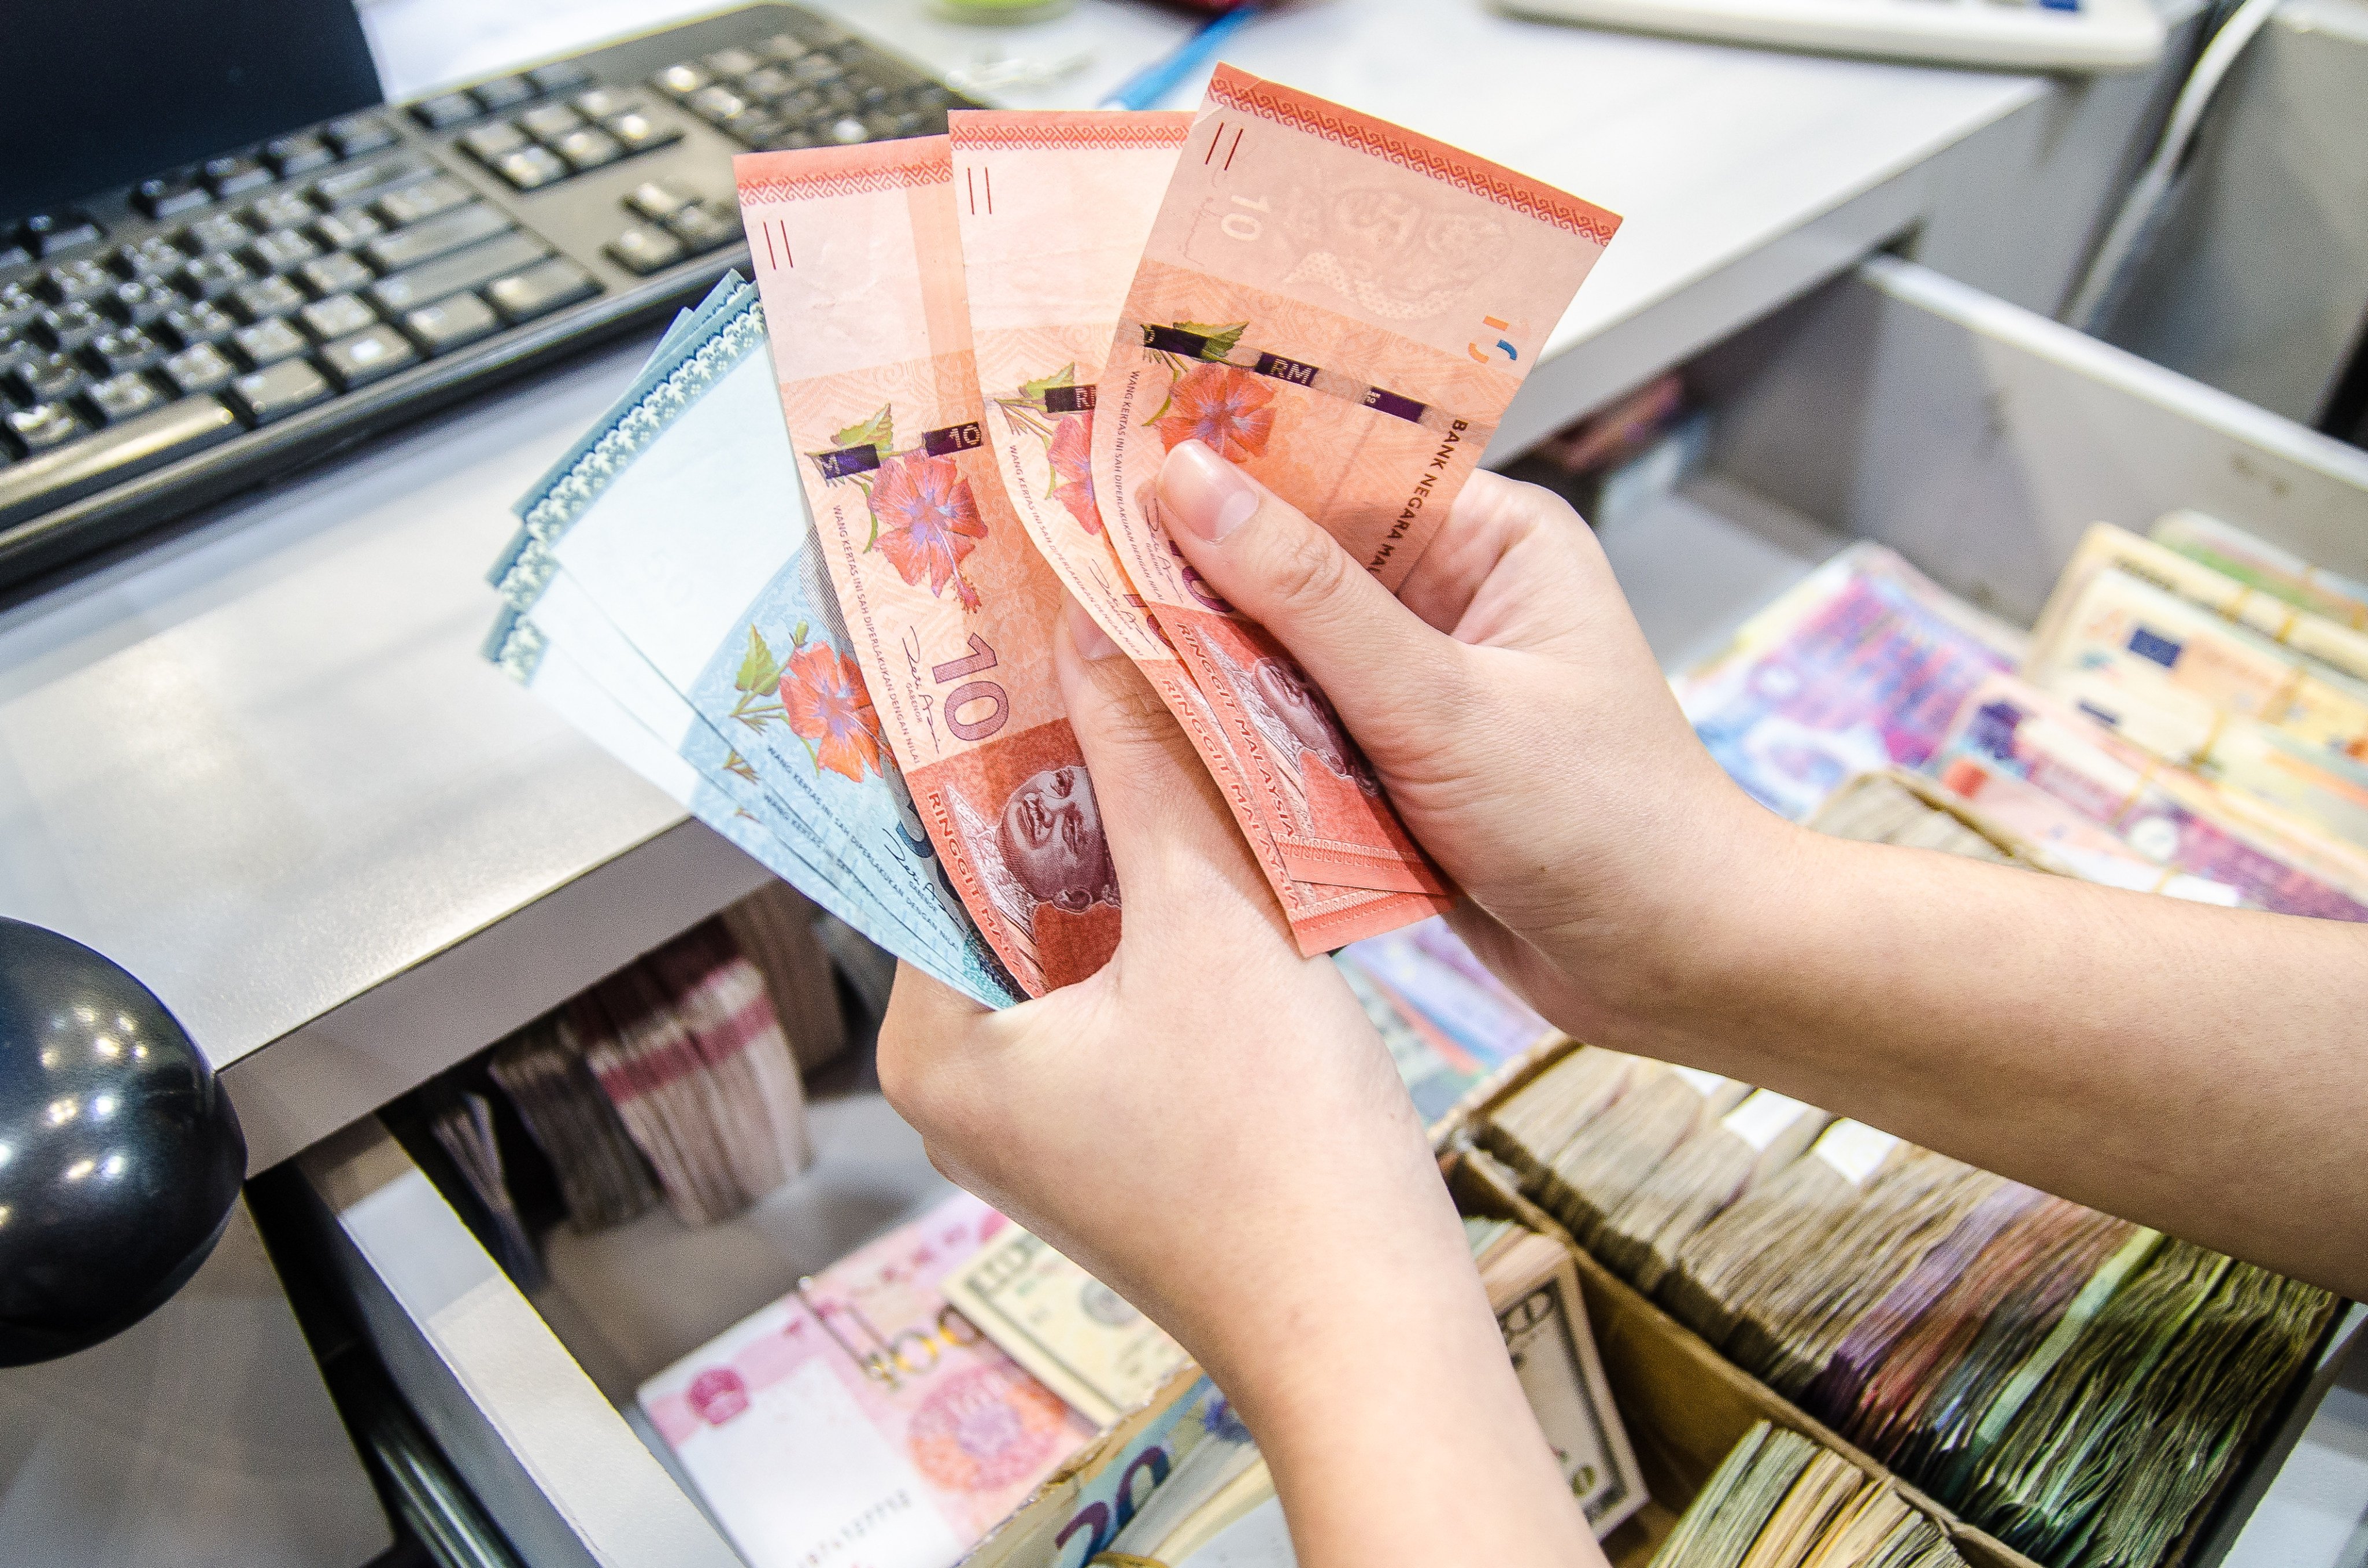 Malaysia is expecting its currency, the ringgit, to strenghten against the US dollar. Photo: Shutterstock